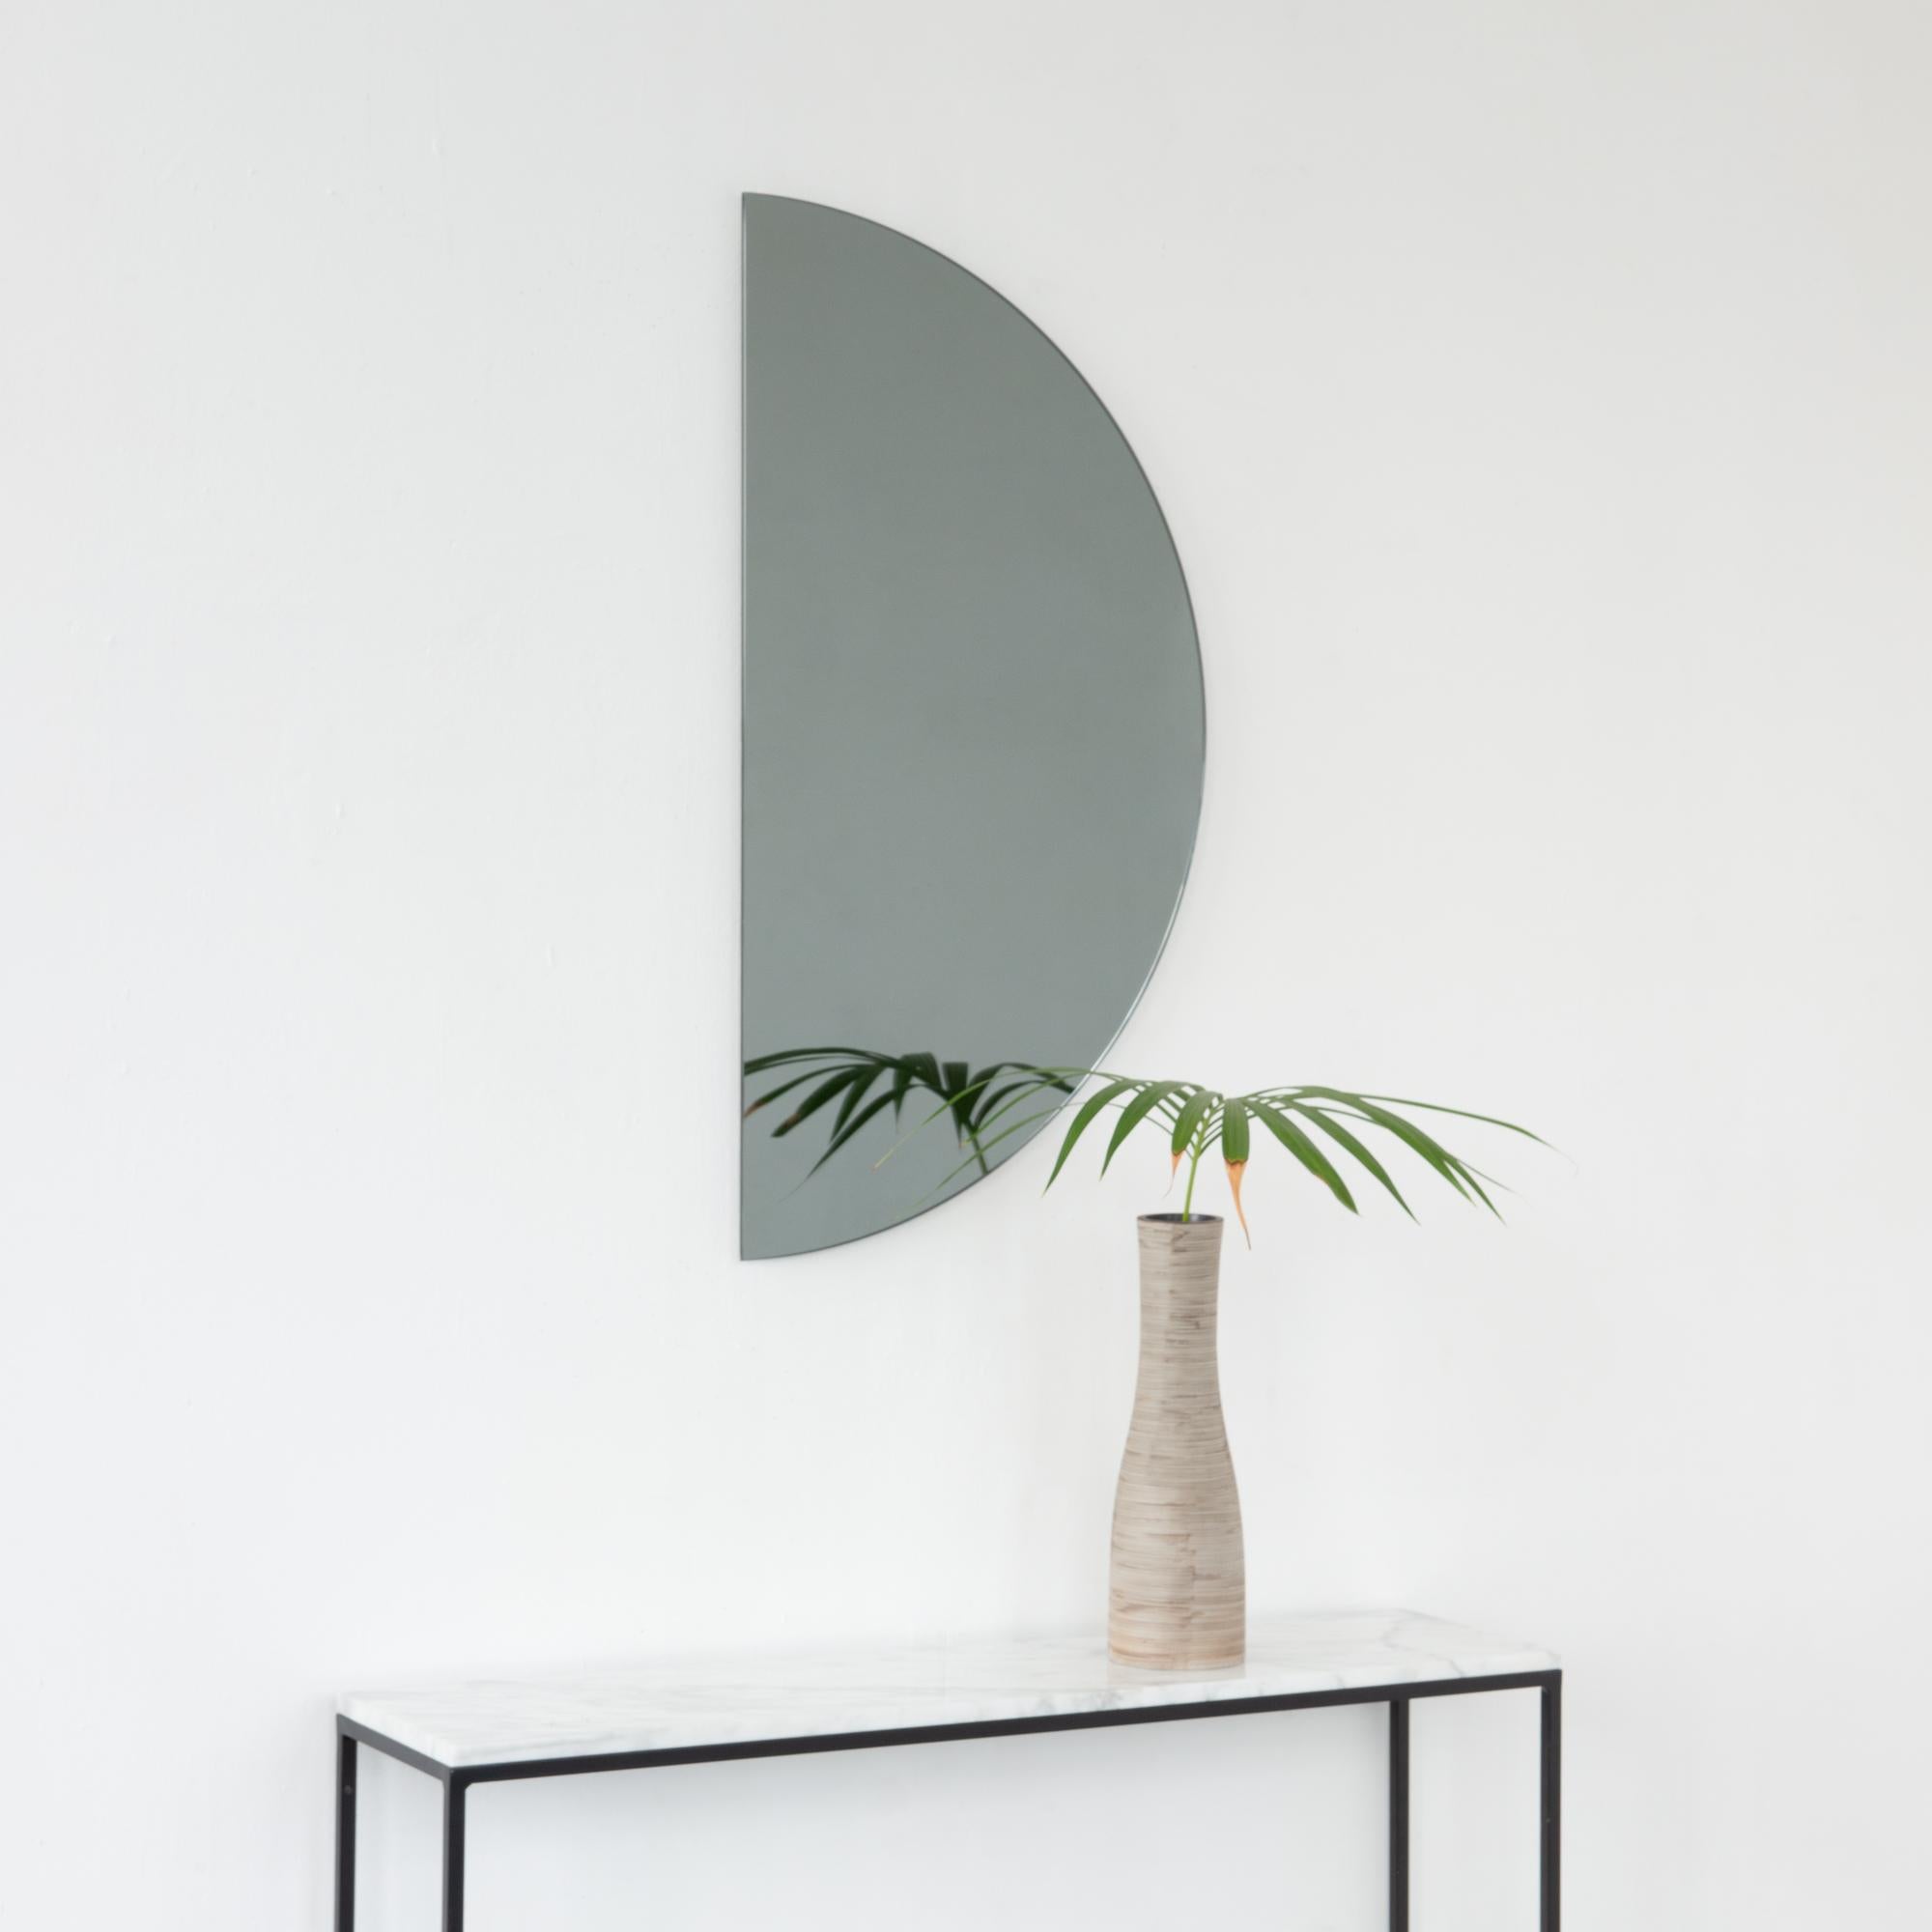 Minimalist half-moon Luna™ black tinted frameless mirror with a floating effect. Fitted with a quality and ingenious hanging system for a flexible installation in 4 different directions. Designed and made in London, UK. 

The backing has a brand new